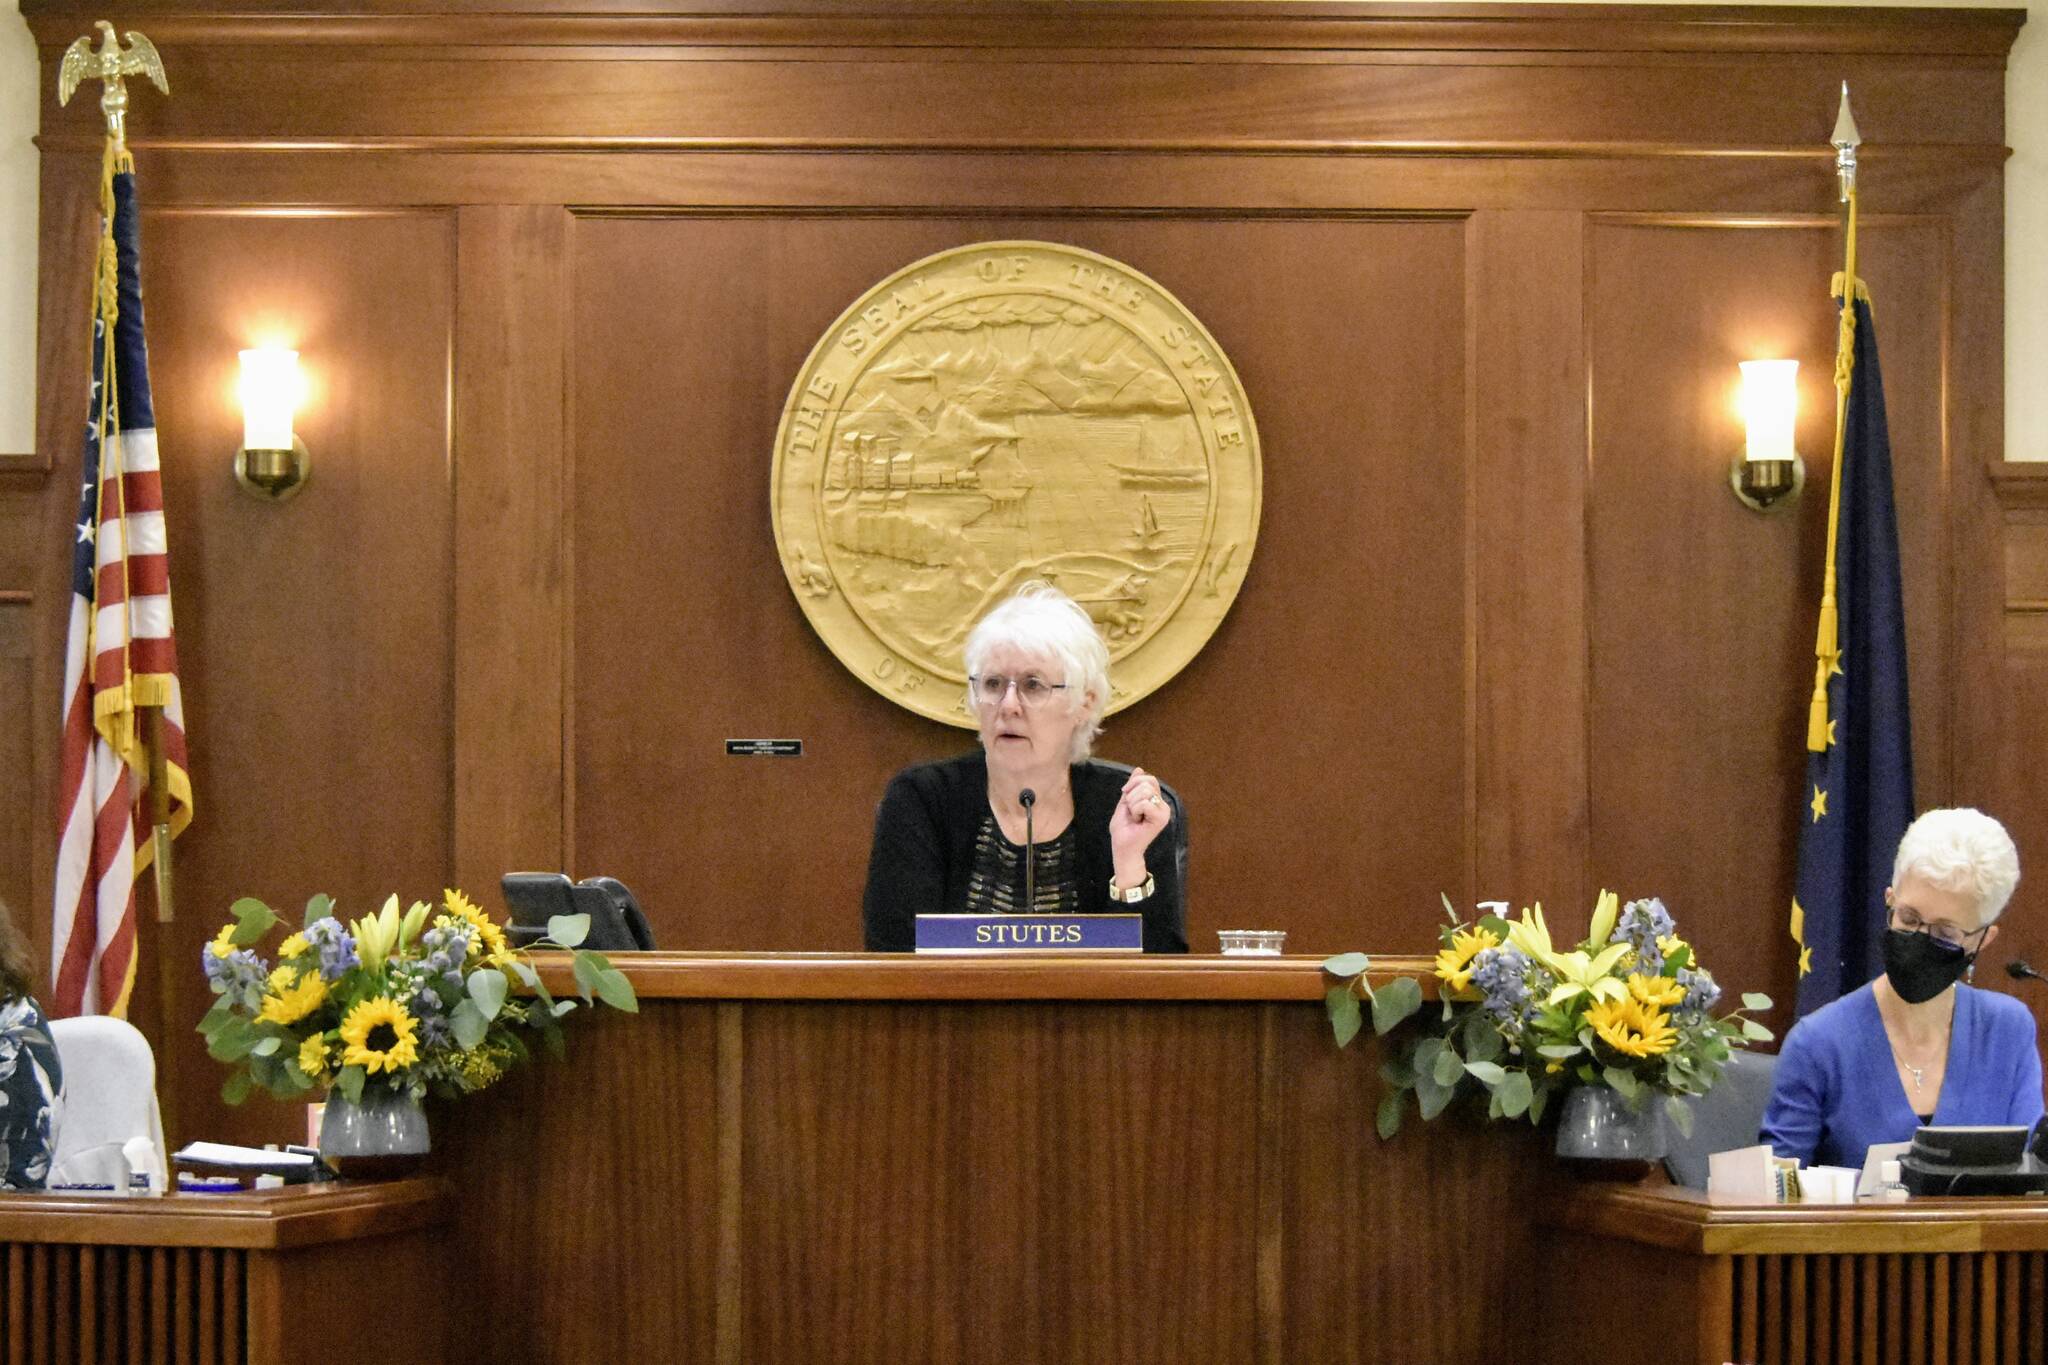 House Speaker Louise Stutes, R-Kodiak, gave a stern warning about decorum to members of the Alaska House of Representatives on the first day of the legislative session on Tuesday, Jan 18, 2022. Last year the Legislature was so divided it took a full regular session and four special sessions before work was completed. (Peter Segall / Juneau Empire)